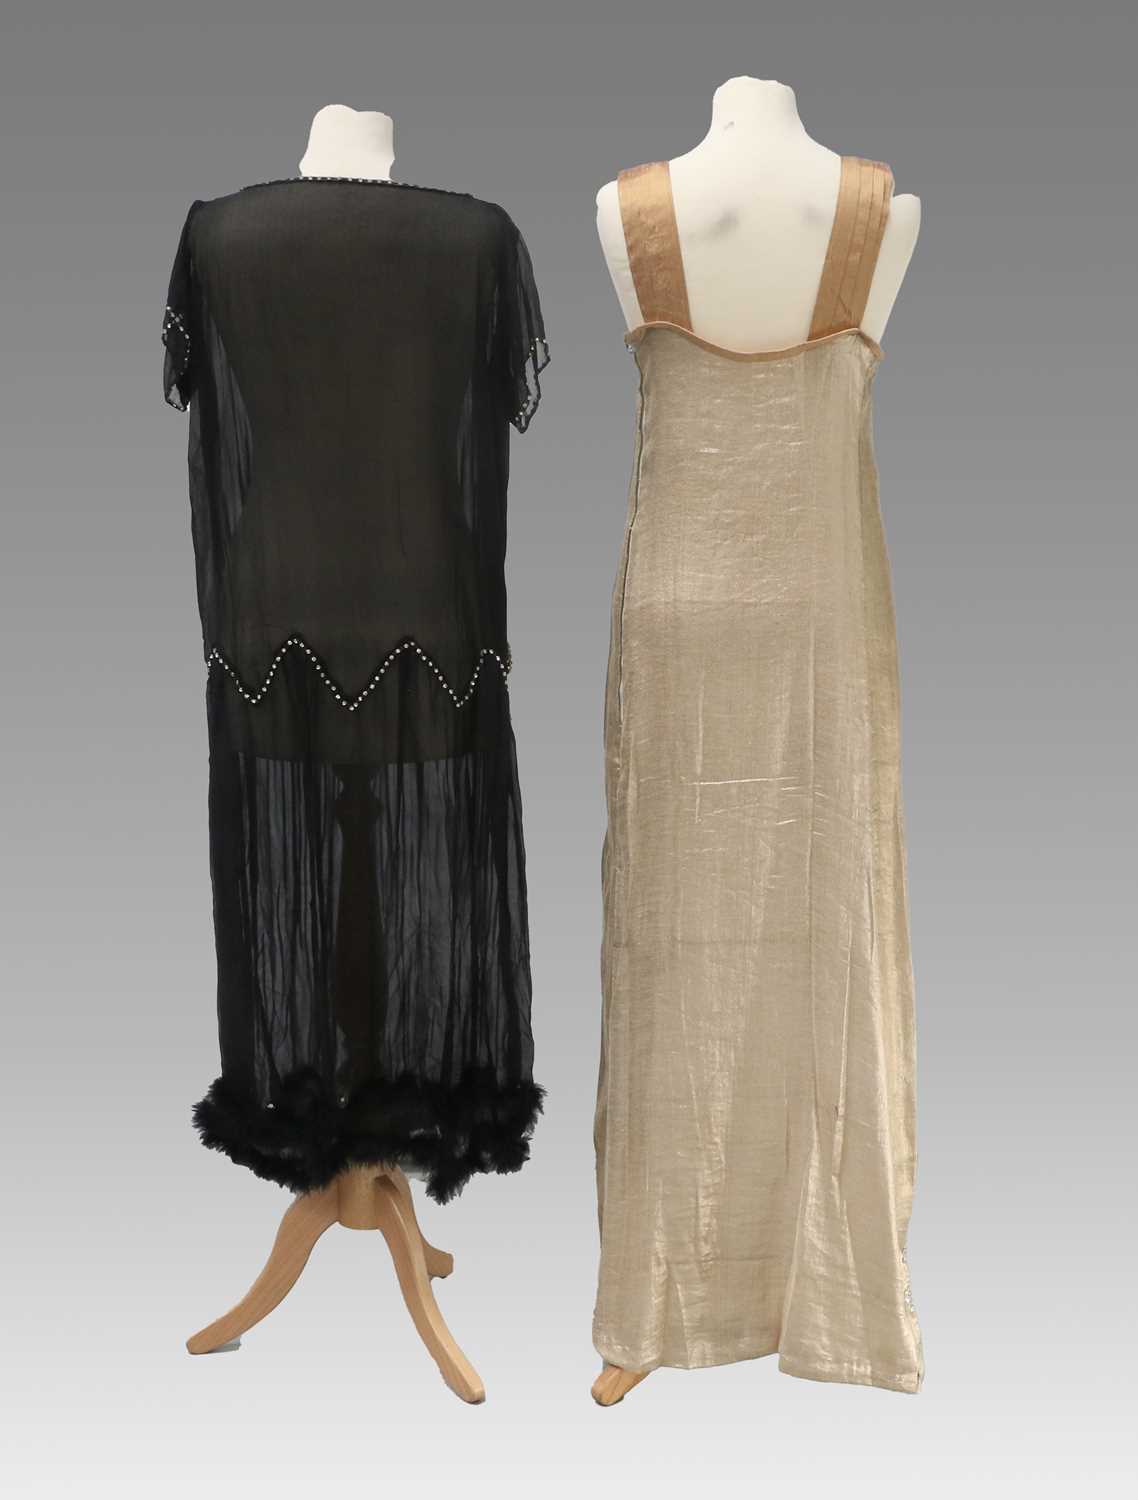 Circa 1920s Black Chiffon Dress with short sleeves, drop waist, paste stone detail to the waist, - Image 2 of 7